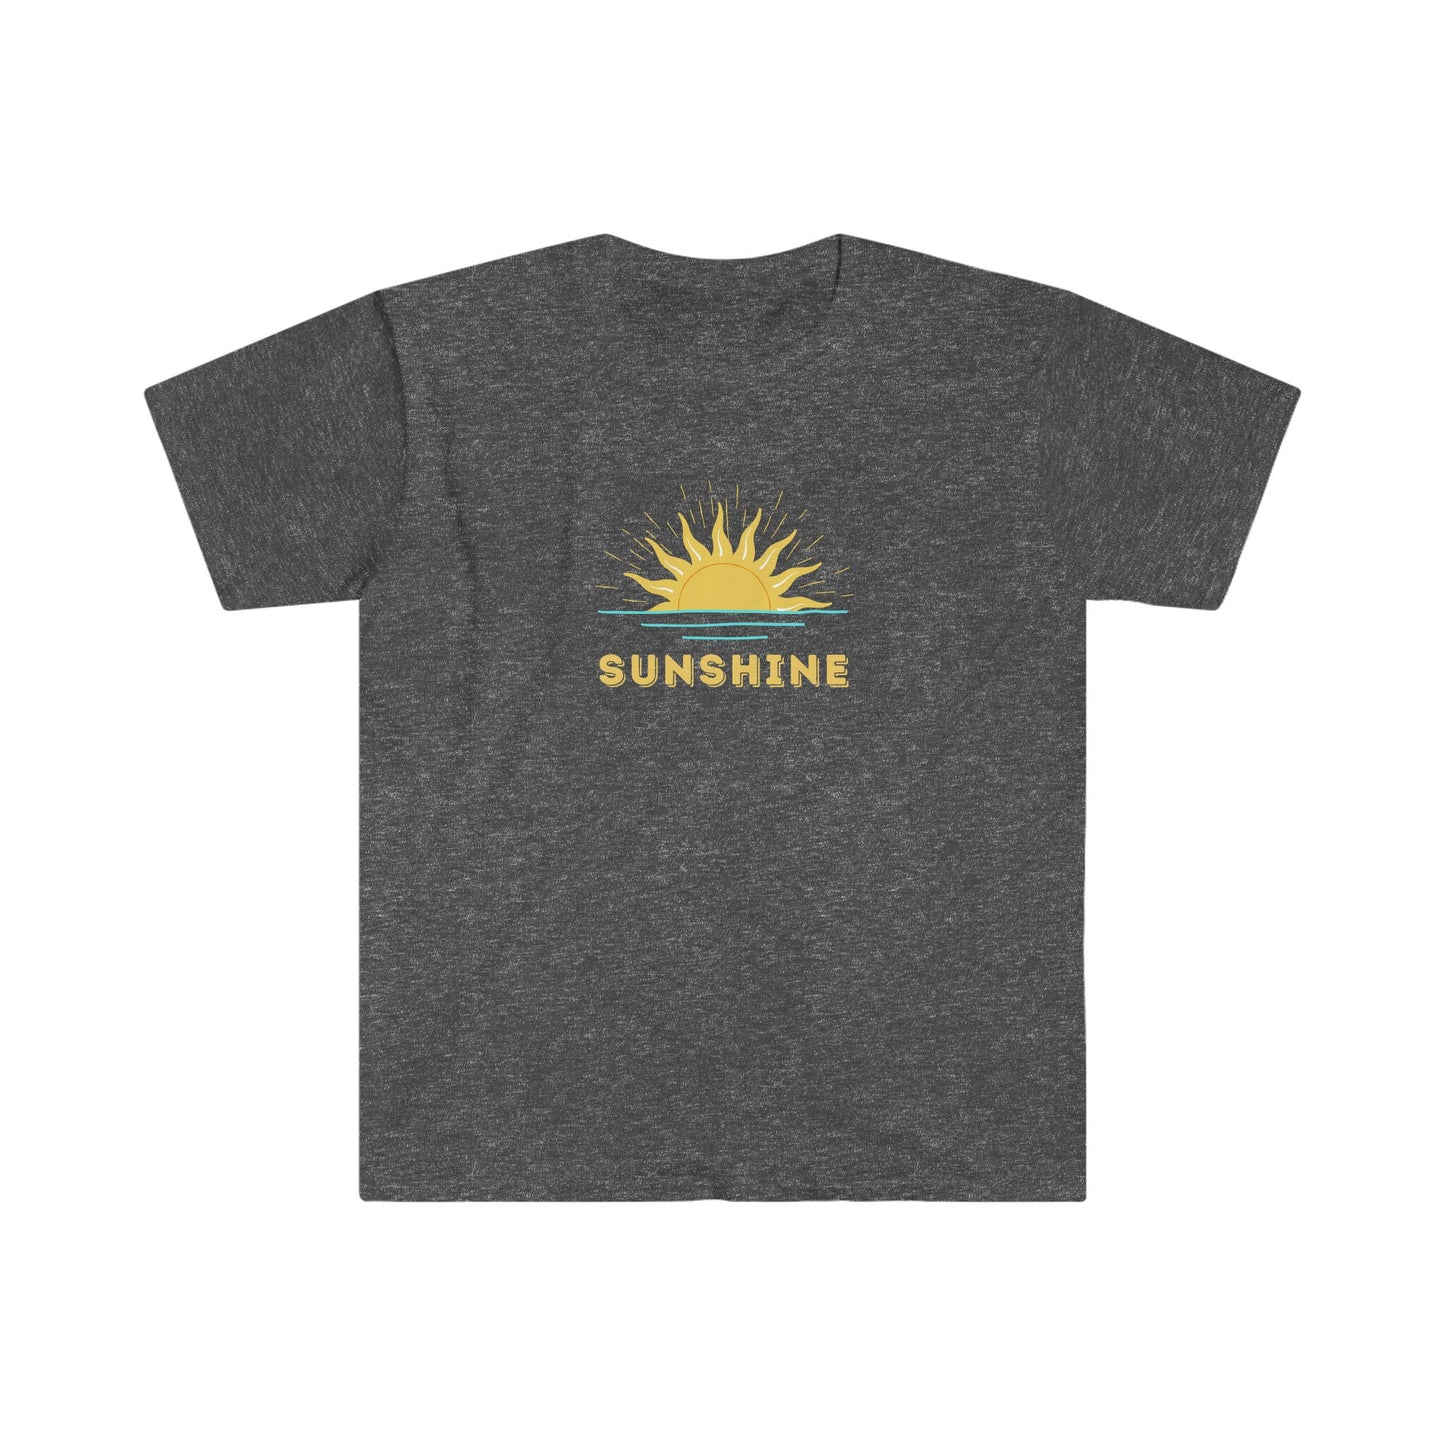 Sunset Design, You are my Sunshine, Relaxed Fit T-Shirt, Festival Clothing, Trendy Streetwear, Rave Clothing, Summer Vacation